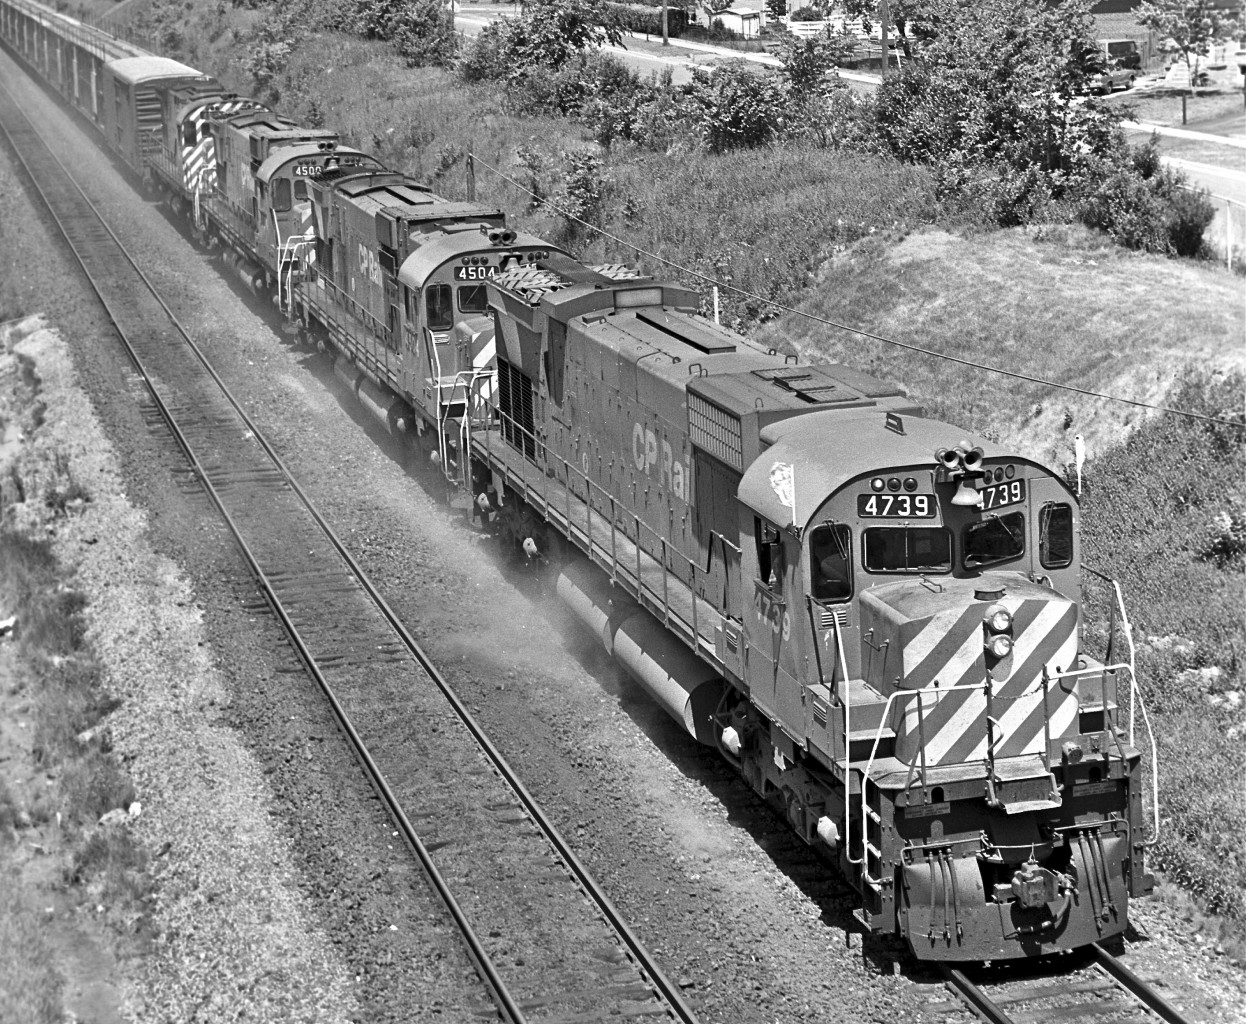 With her “Extra” flags straining, M-636 #4739 leads the charge through Scarborough, circa 1976.  Built by MLW six years earlier, the locomotive was retired in ’93, un-retired in ’94, and re-retired in ’95.


Check out Timothy Wakeman’s great shot of #4739 taken in 1987…


http://www.railpictures.ca/?attachment_id=15057


The second and third units are a couple of C-630’s.  Both were built in 1968.  #4504 served until ’91.  #4500 lasted with the CPR until 1993.  She was then donated to the York-Durham Heritage Railway Society in Uxbridge, Ontario.  Shortly thereafter the locomotive ended up south of the 49th.